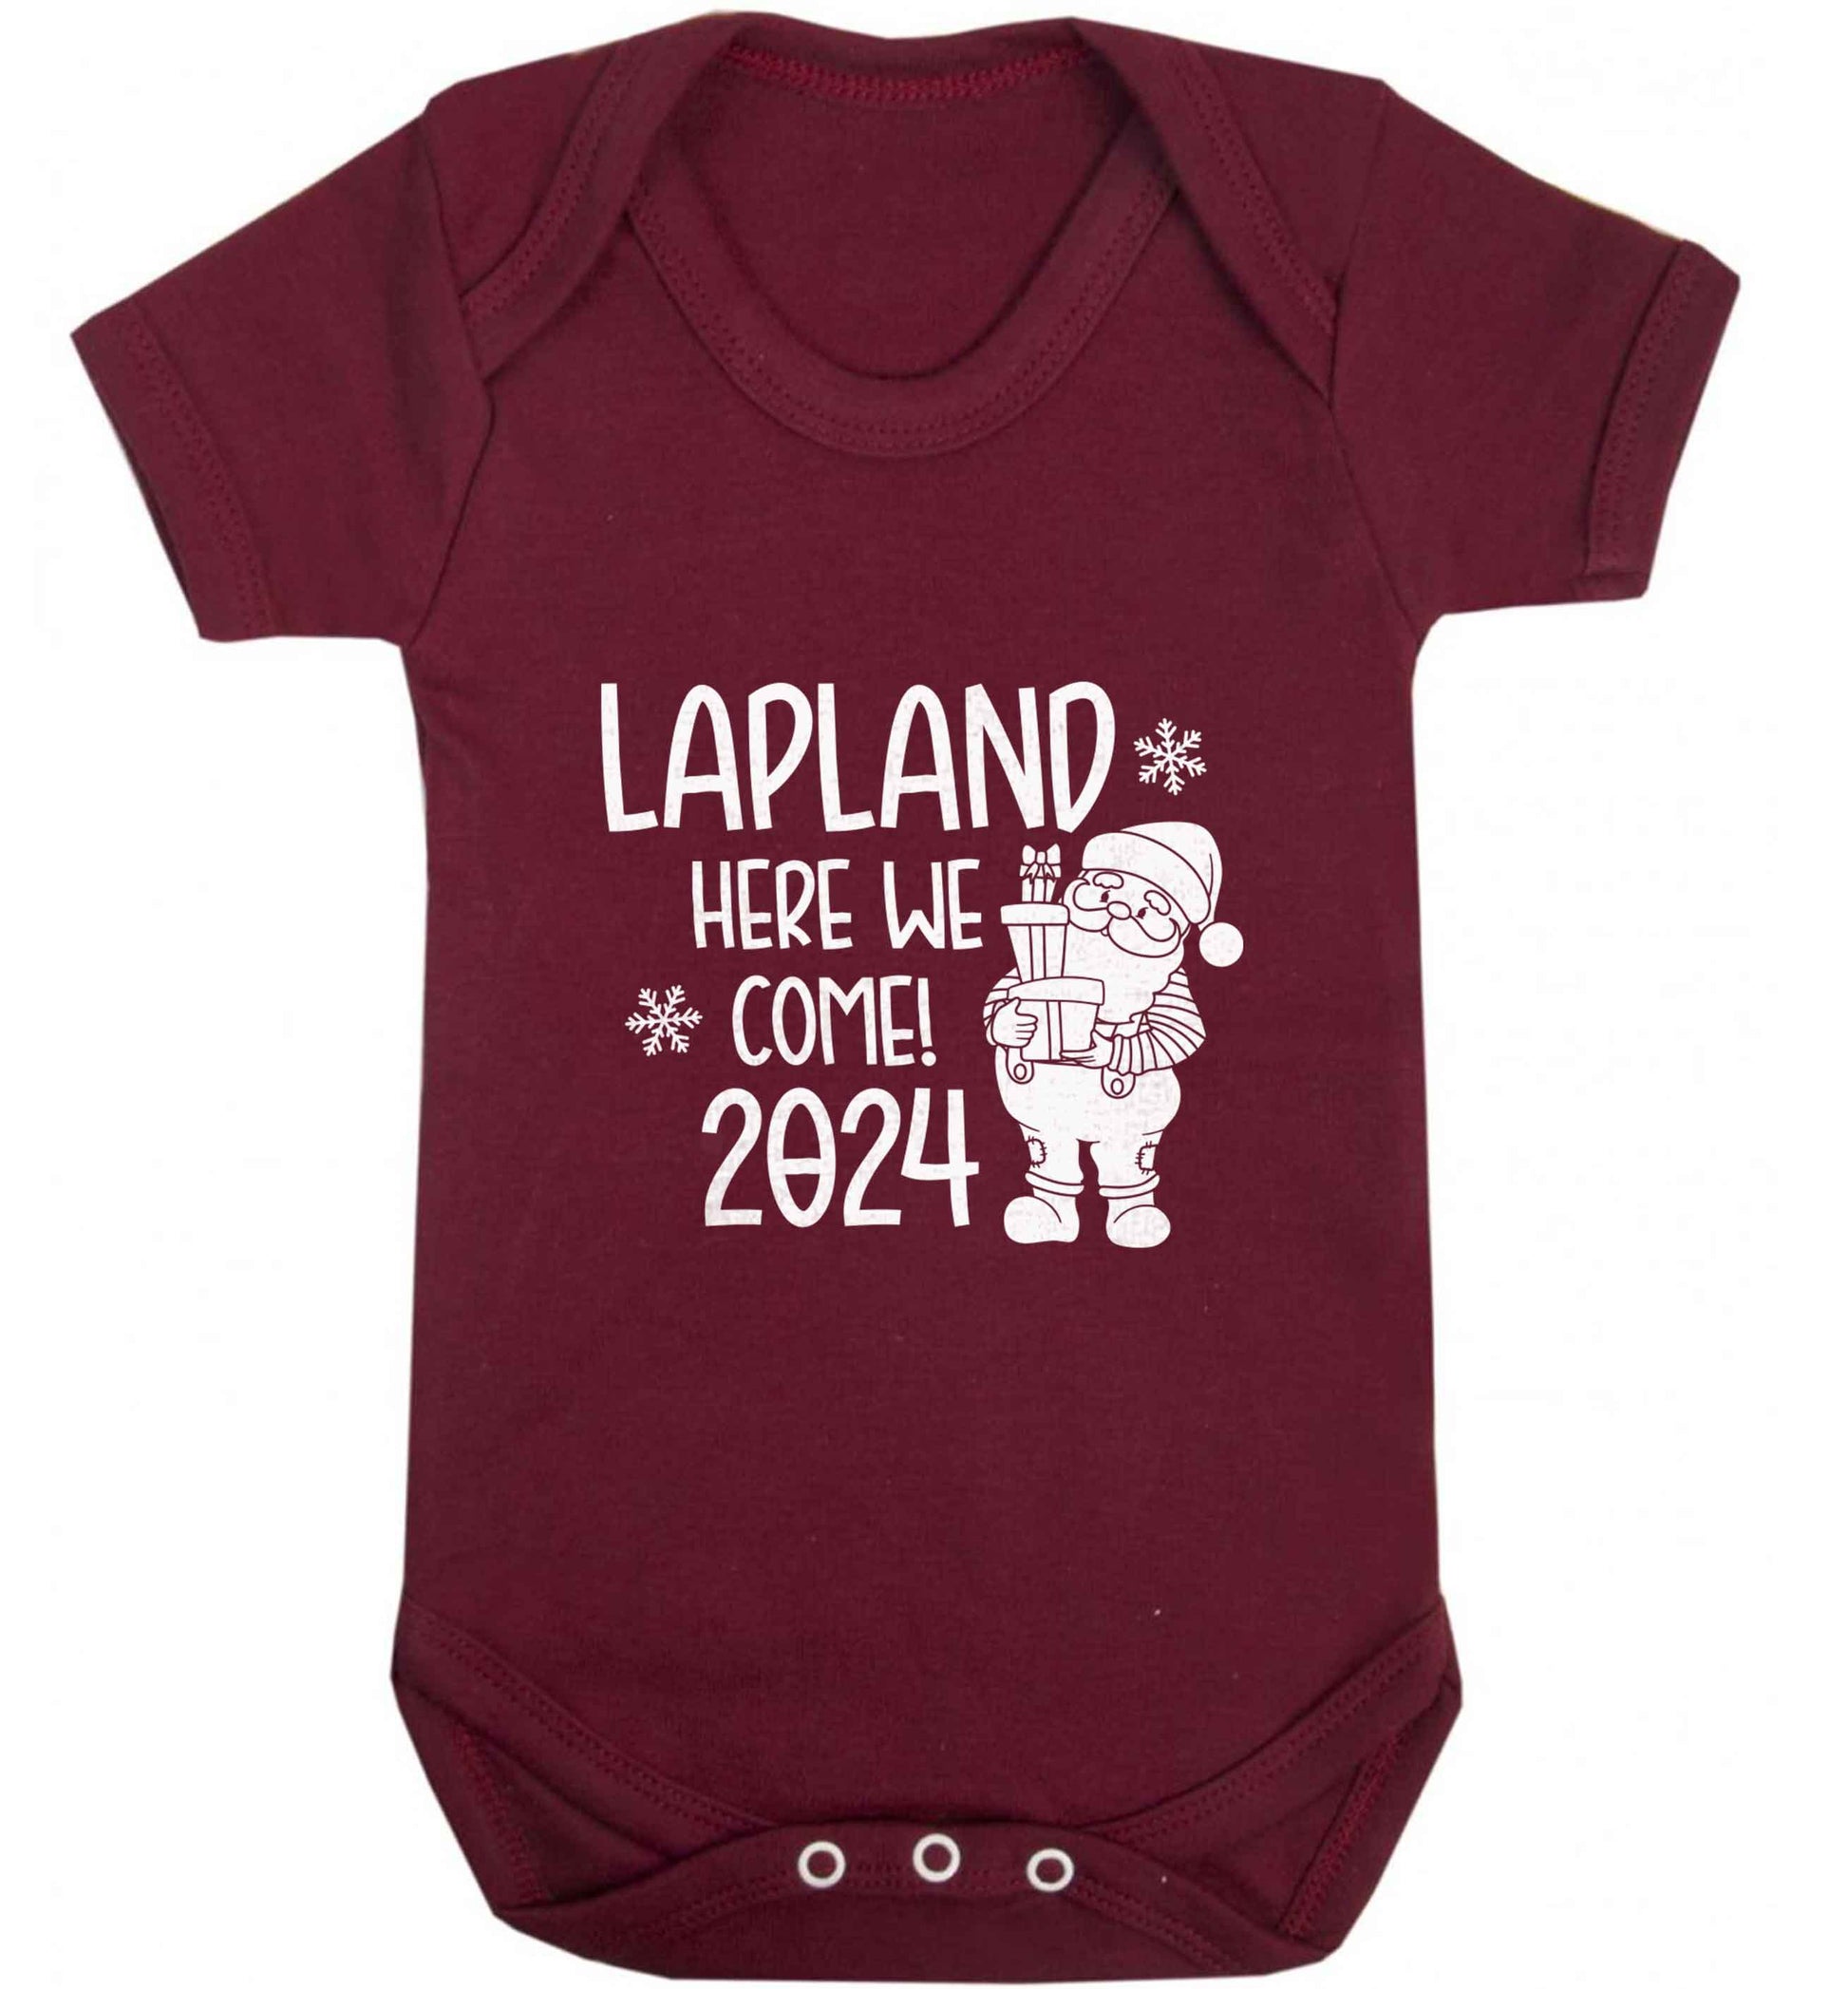 Lapland here we come baby vest maroon 18-24 months